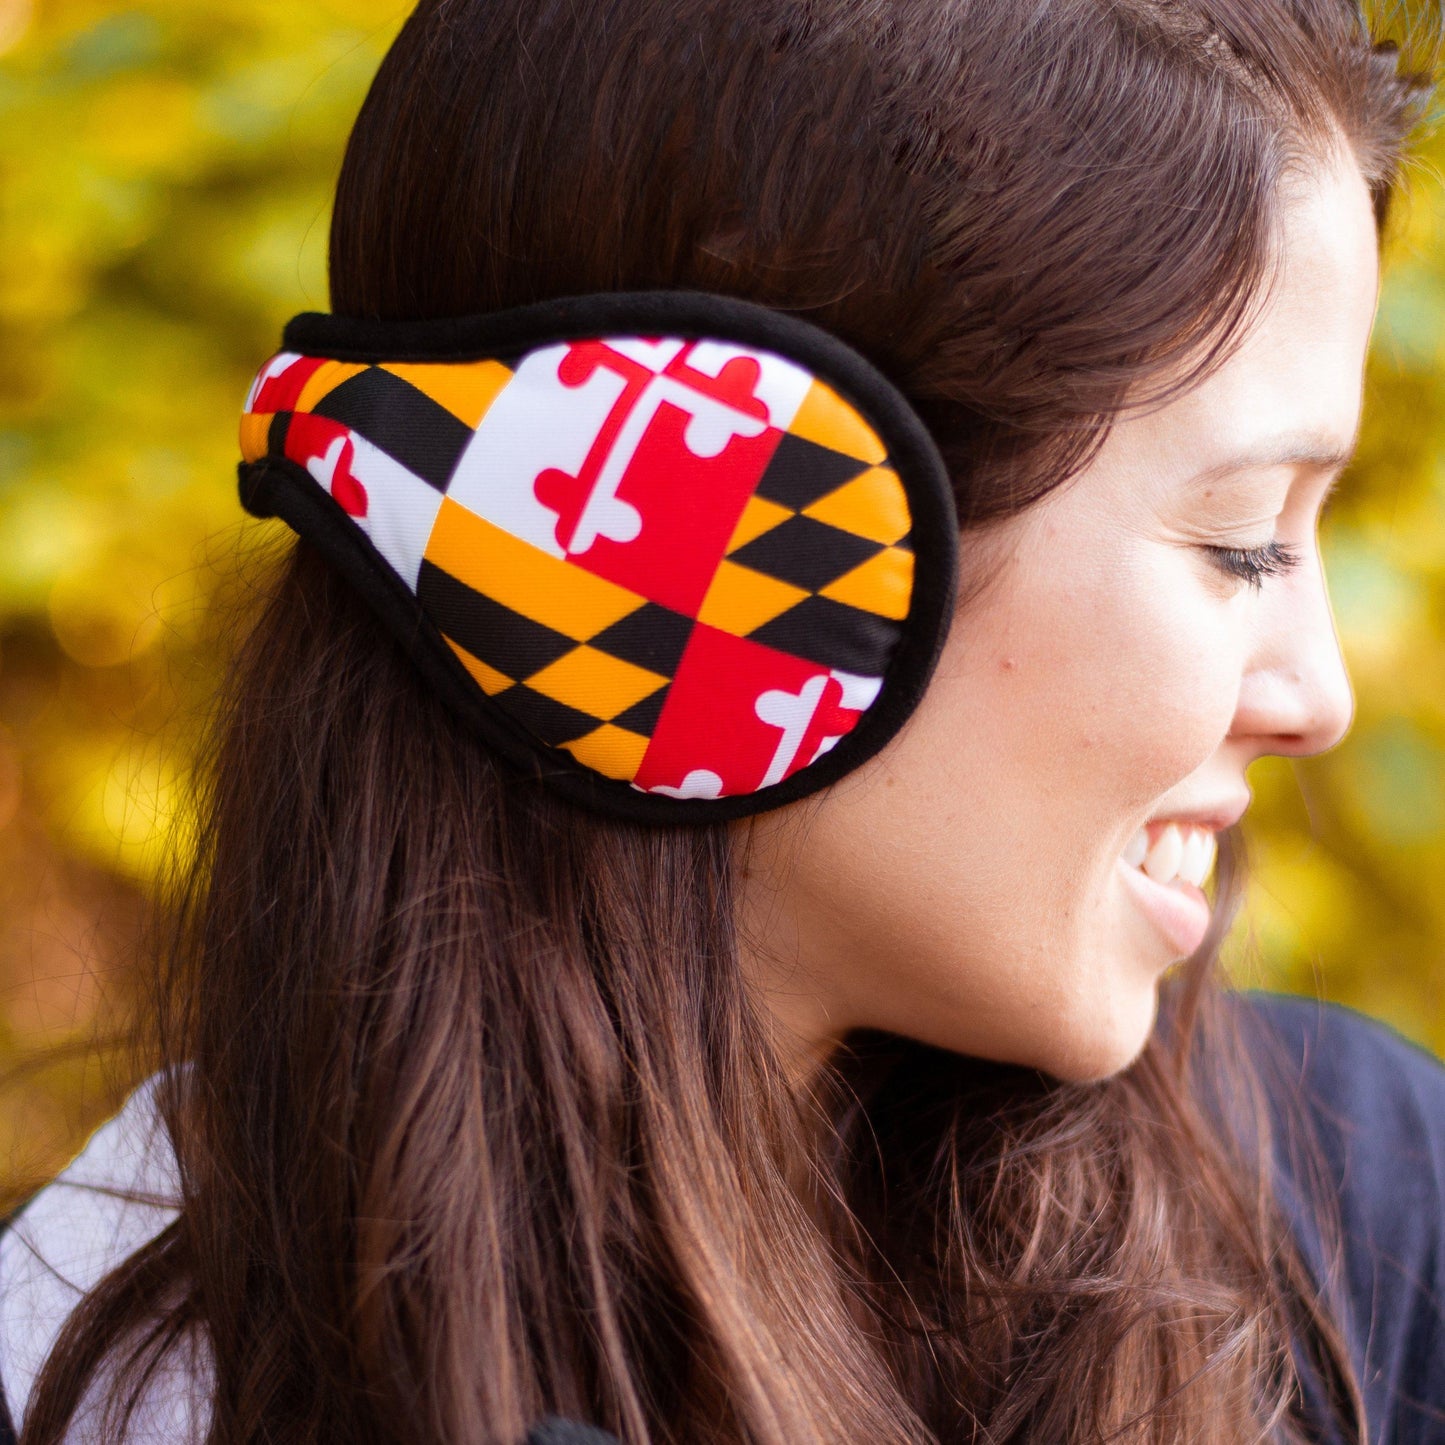 Maryland Flag / Earmuffs - Route One Apparel